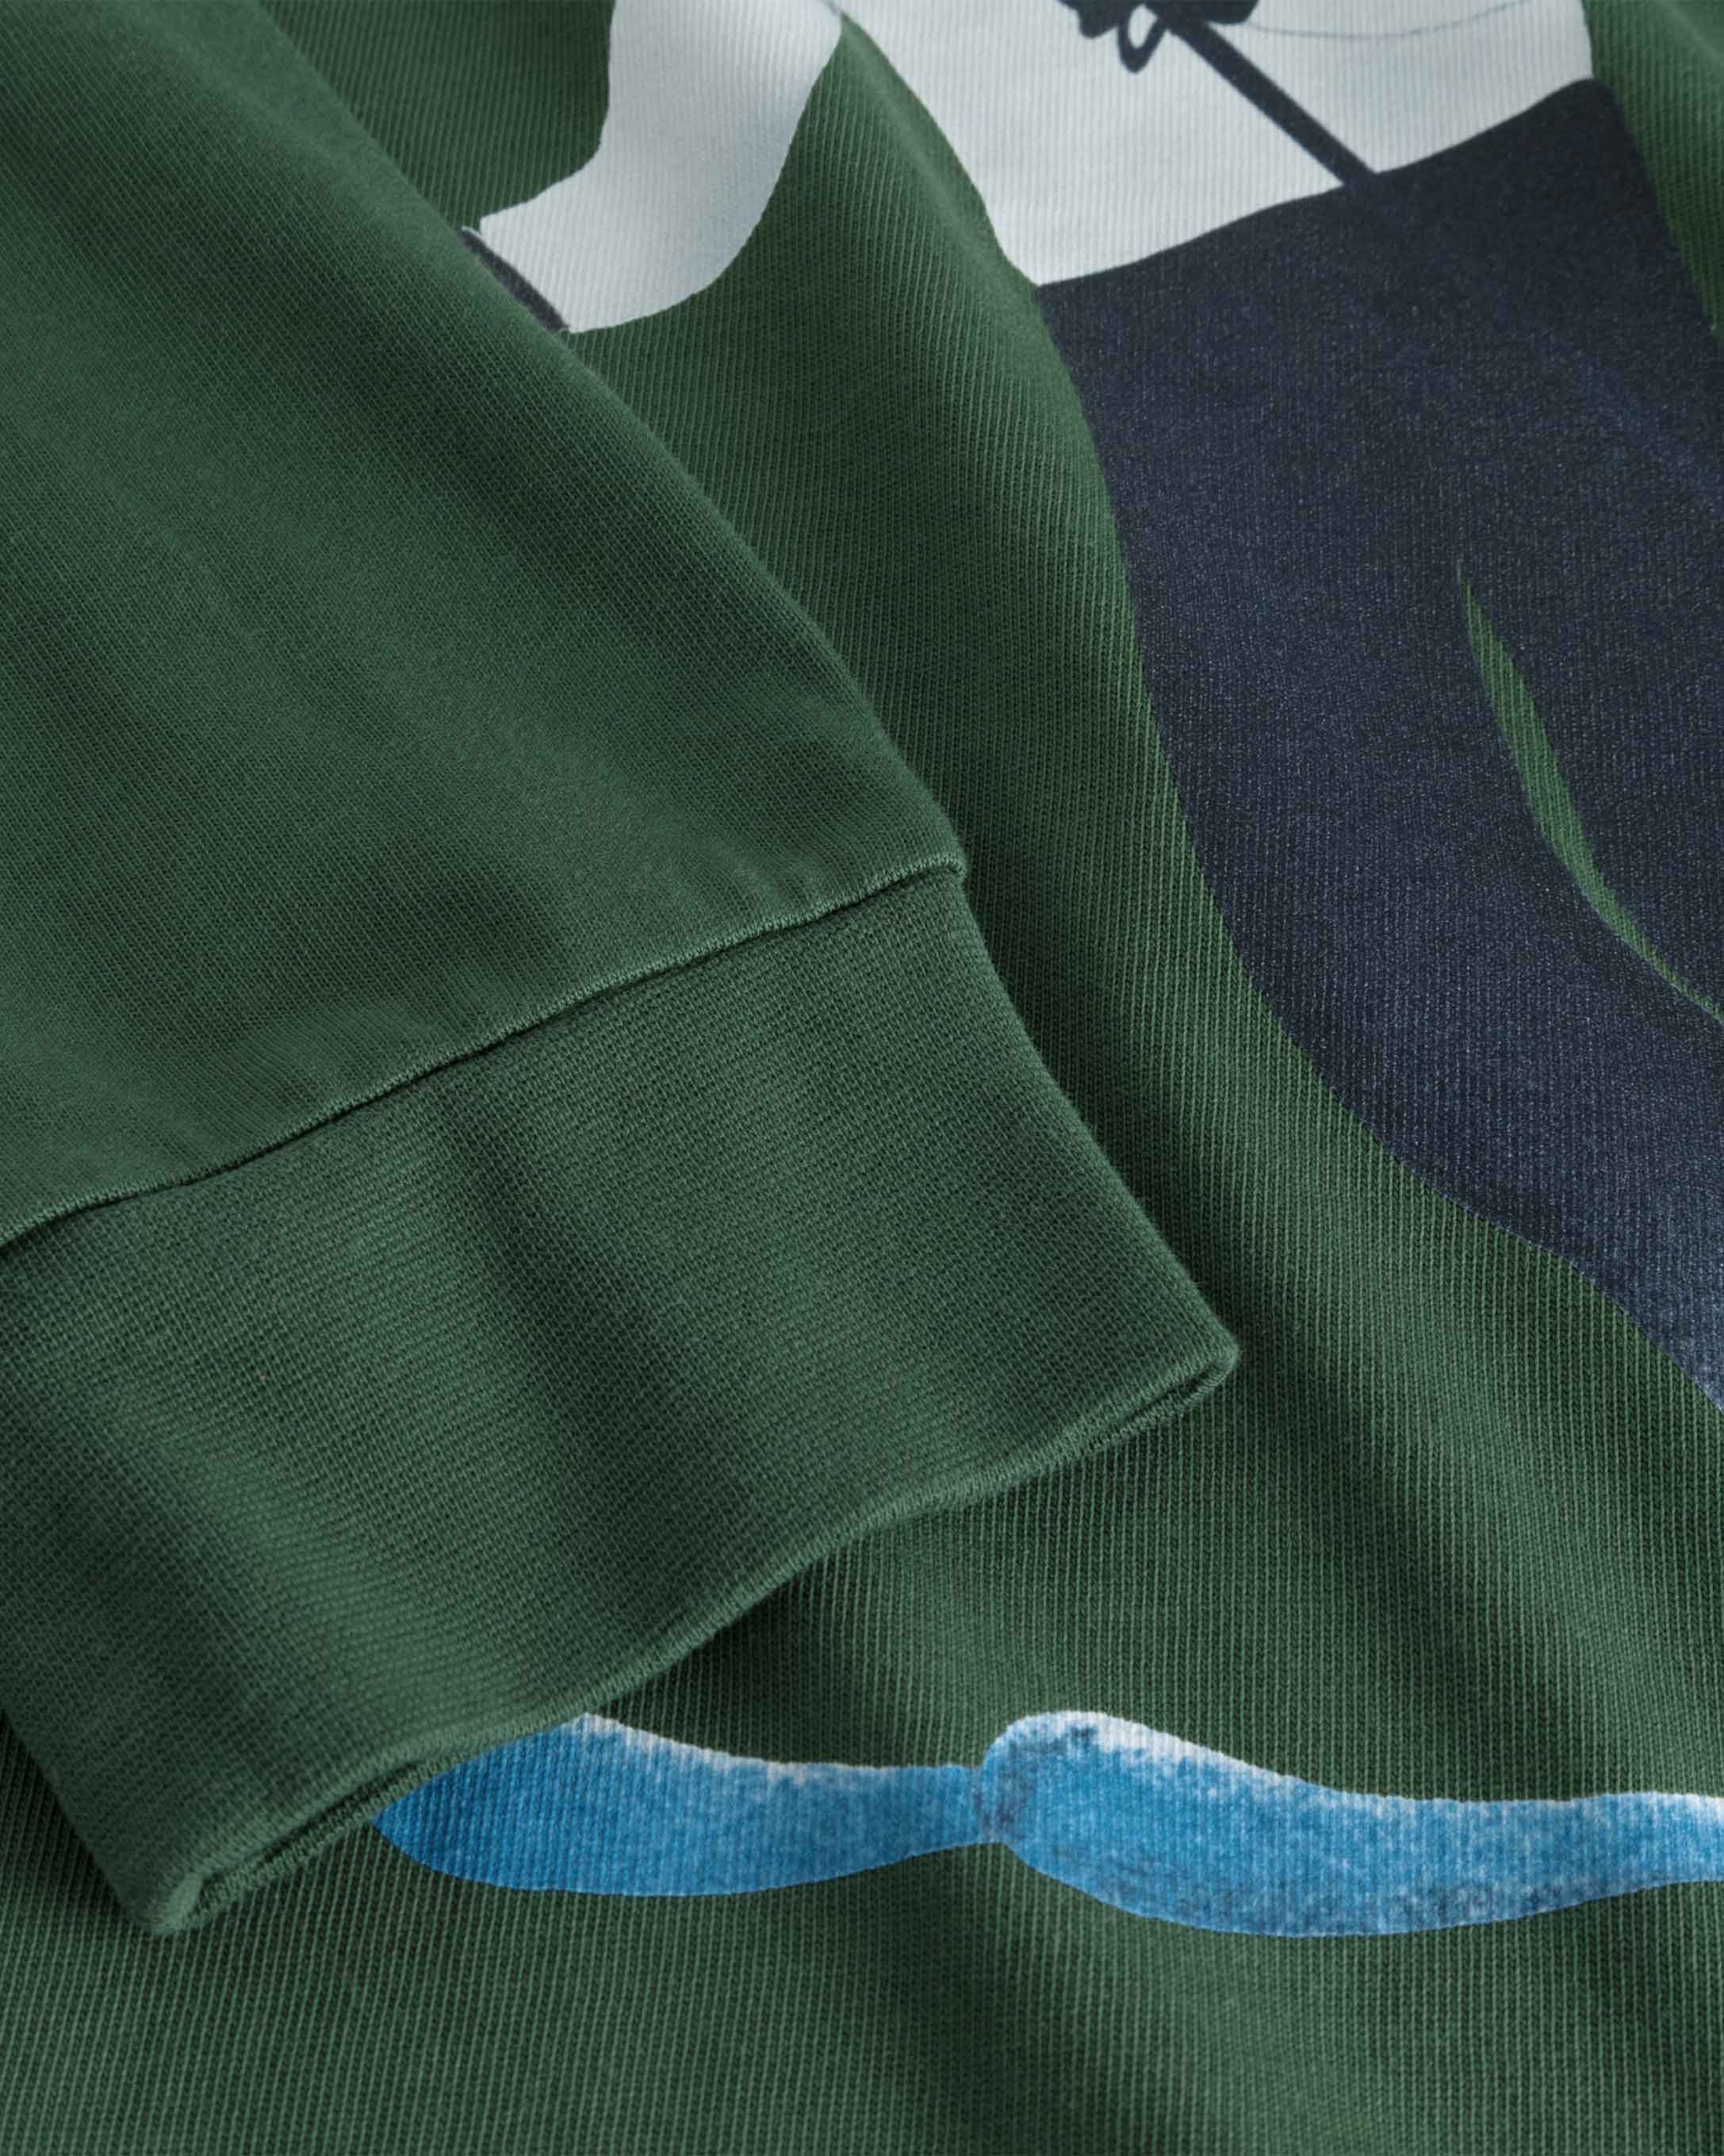 Close-up of sleeve and stitching on green T-shirt